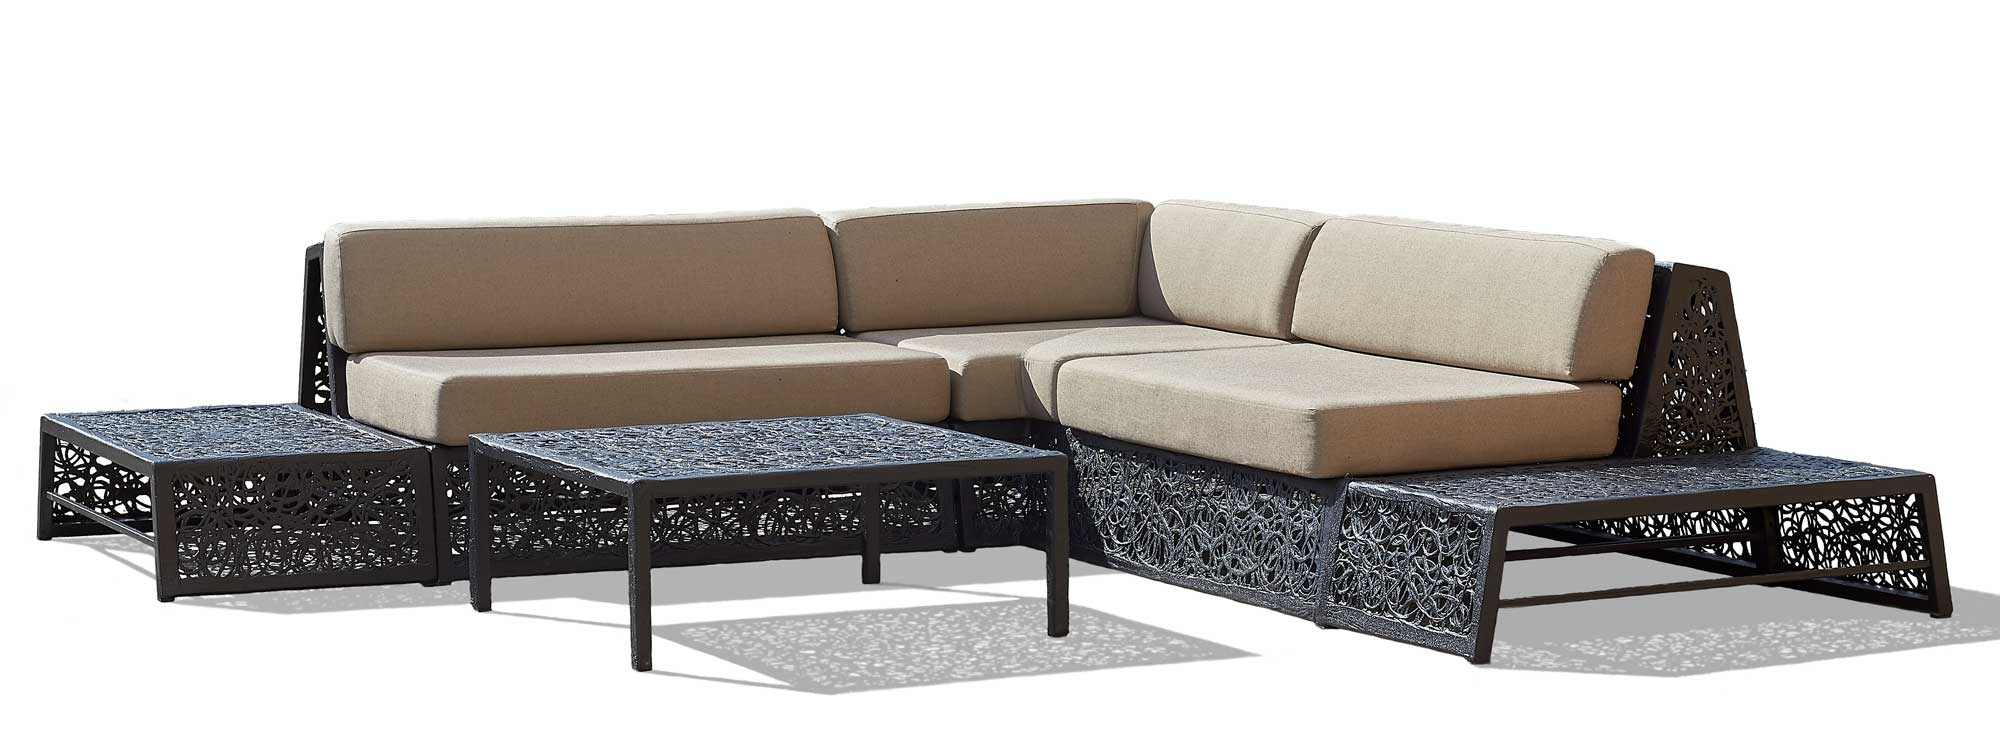 Studio image of Bios Lounge garden sofa in black basalt fibre with cappuccino cushions by Unknown Nordic